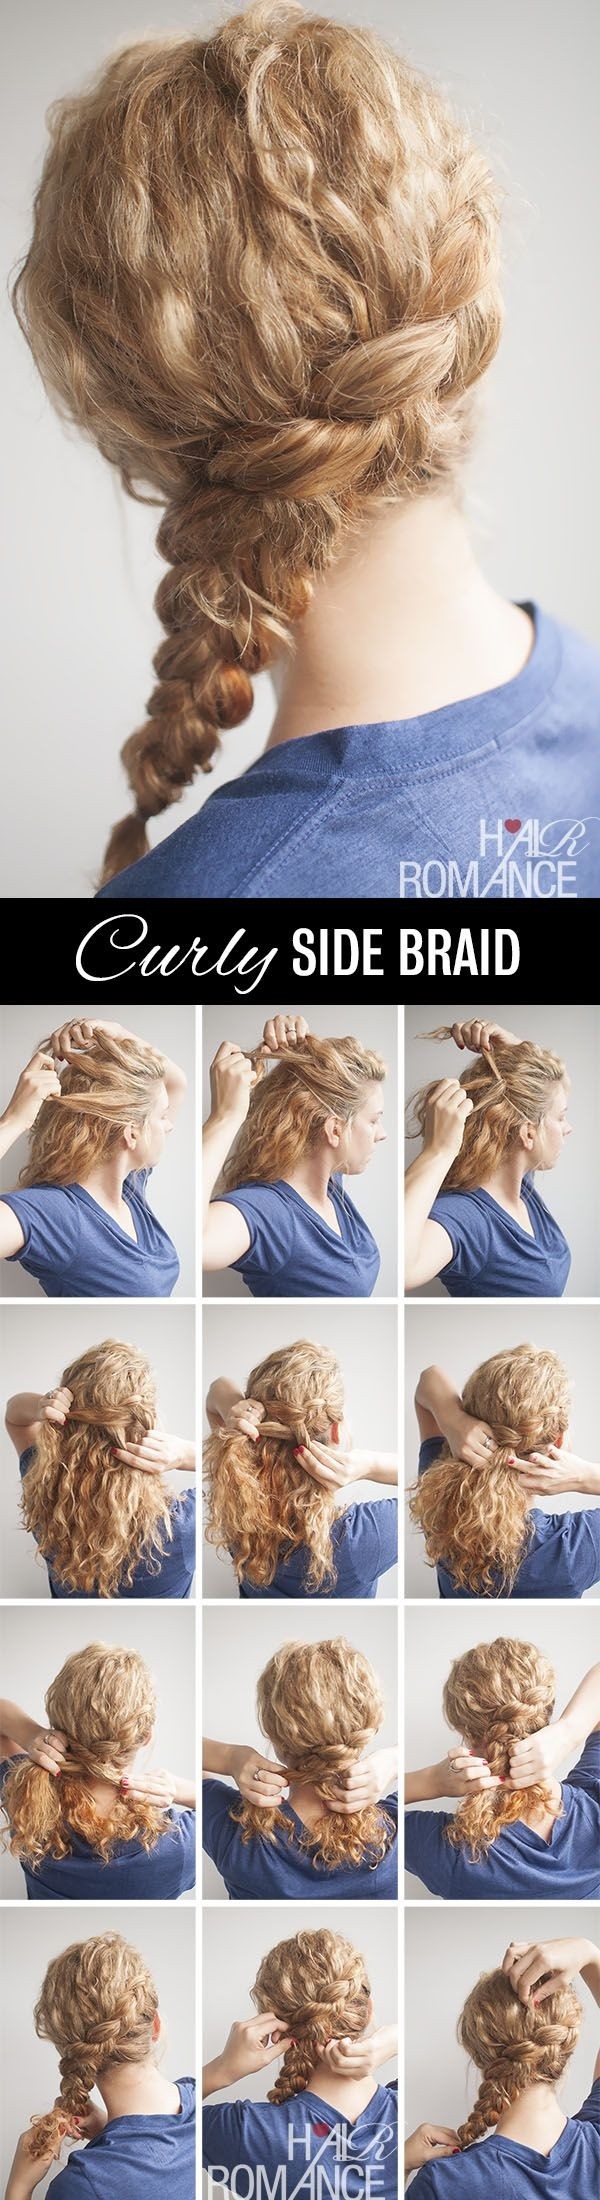 Curly Side Braid Hairstyle Tutorial for Long Hair